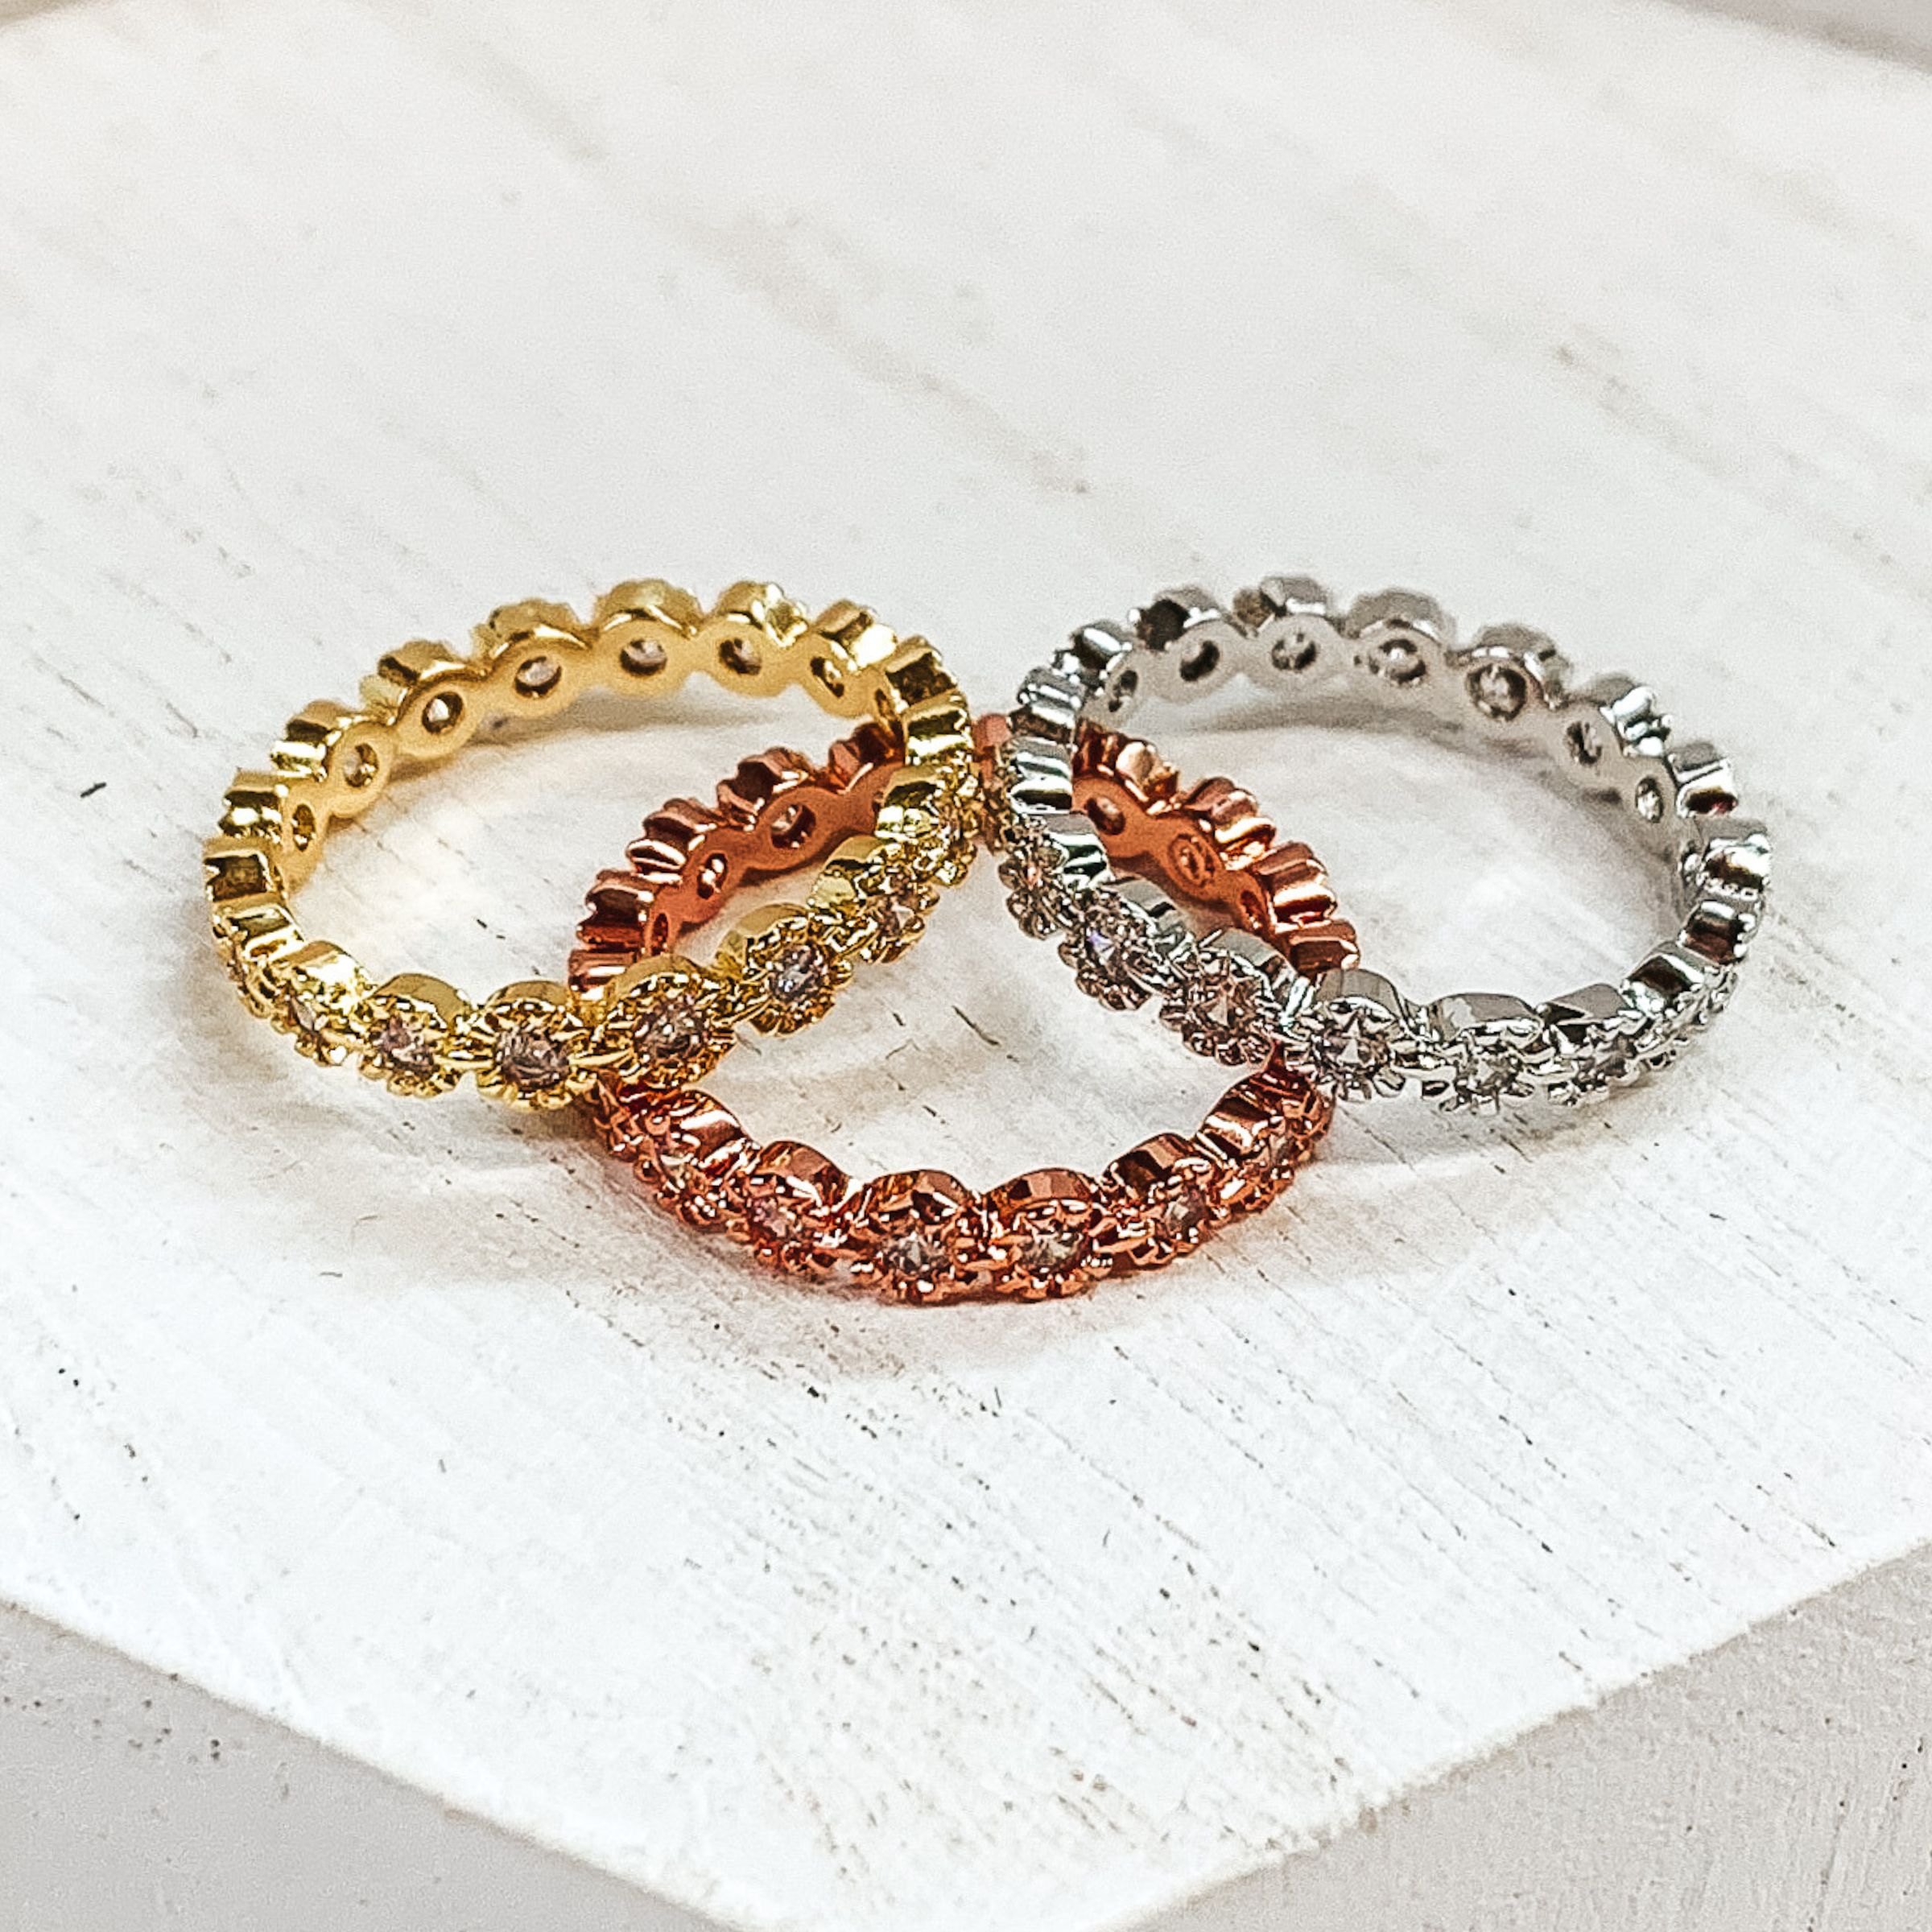 Set of three rings in silver, gold, and rose gold. Each is made of circles with center crystals in the color of the ring. These rings are pictured on a white background.